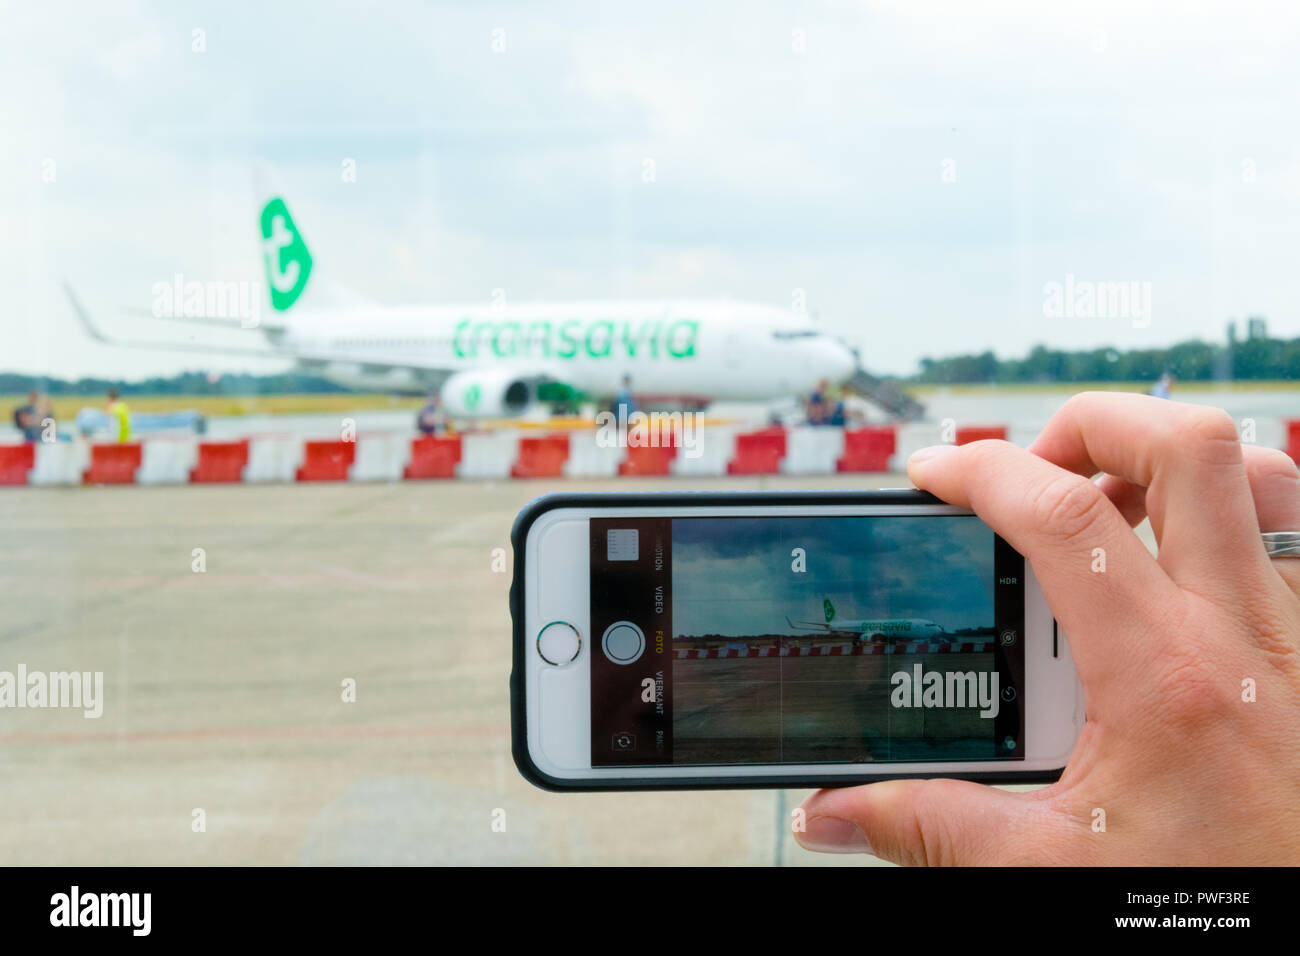 Groningen, Eelde Airport, Netherlands, August 15, 2018: View of a man's hands making photo on mobile phone of Transavia boeing 737-800 on airport Stock Photo